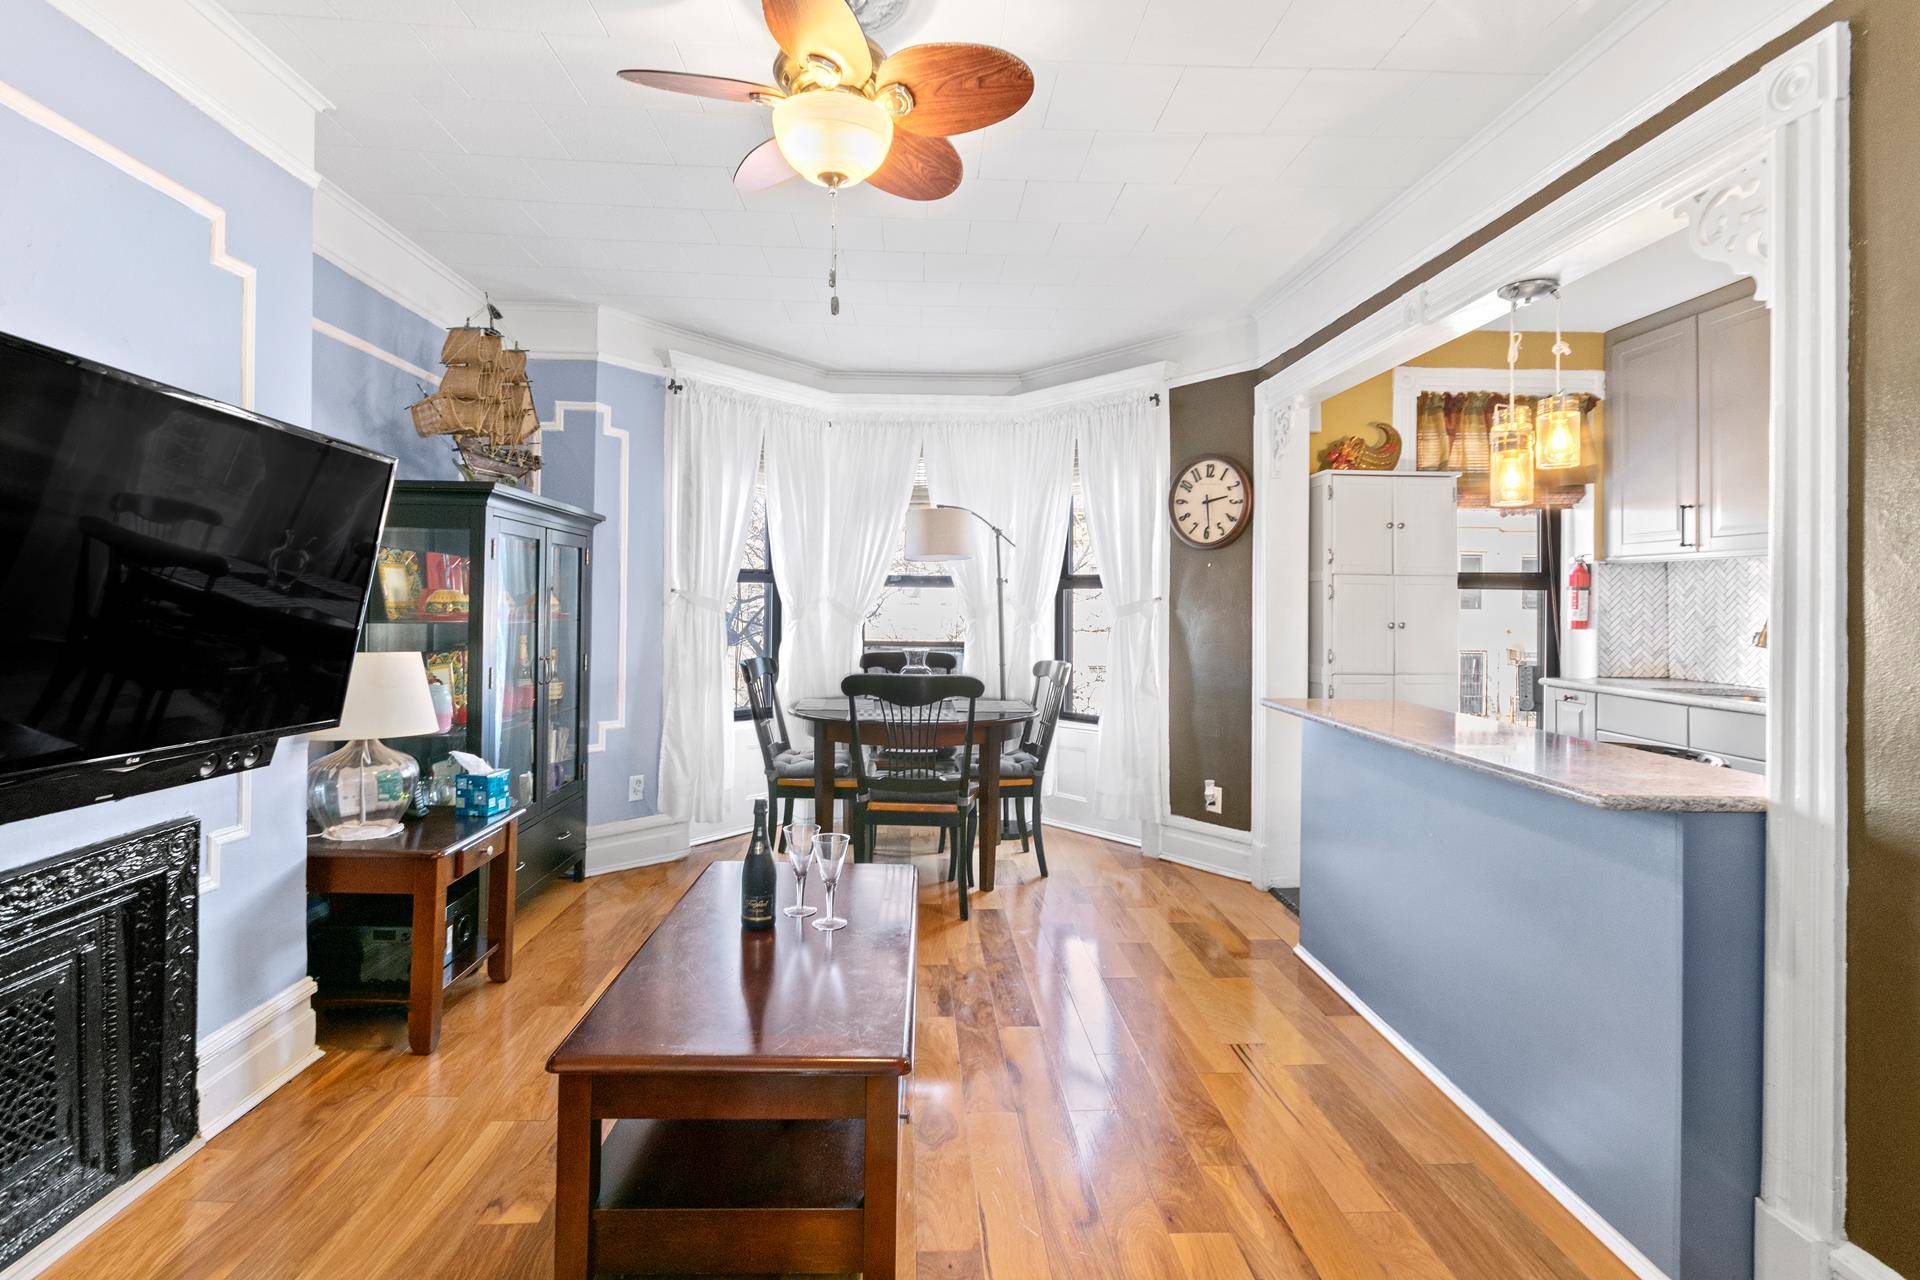 Featured on Curbed, Bloomberg and also on Brownstoner as one of their top listings of the week out of all of Brooklyn !